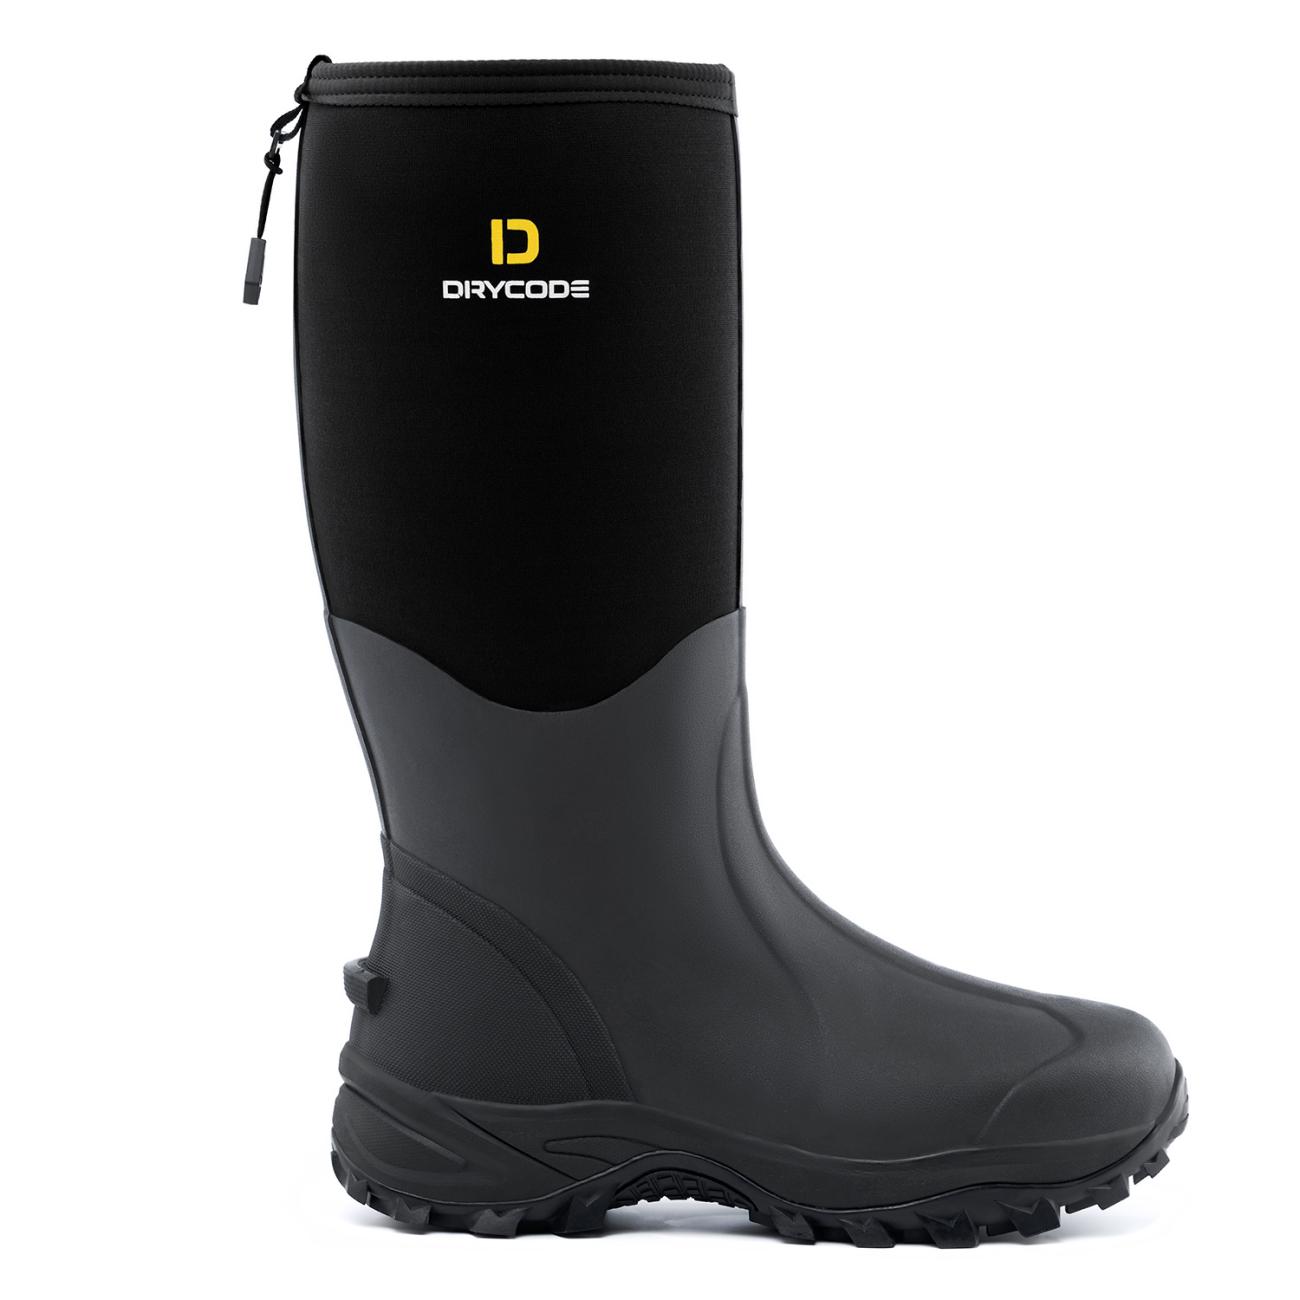 DRYCODE Rubber Boots for Men and Women (Black), 6mm Warm Neoprene